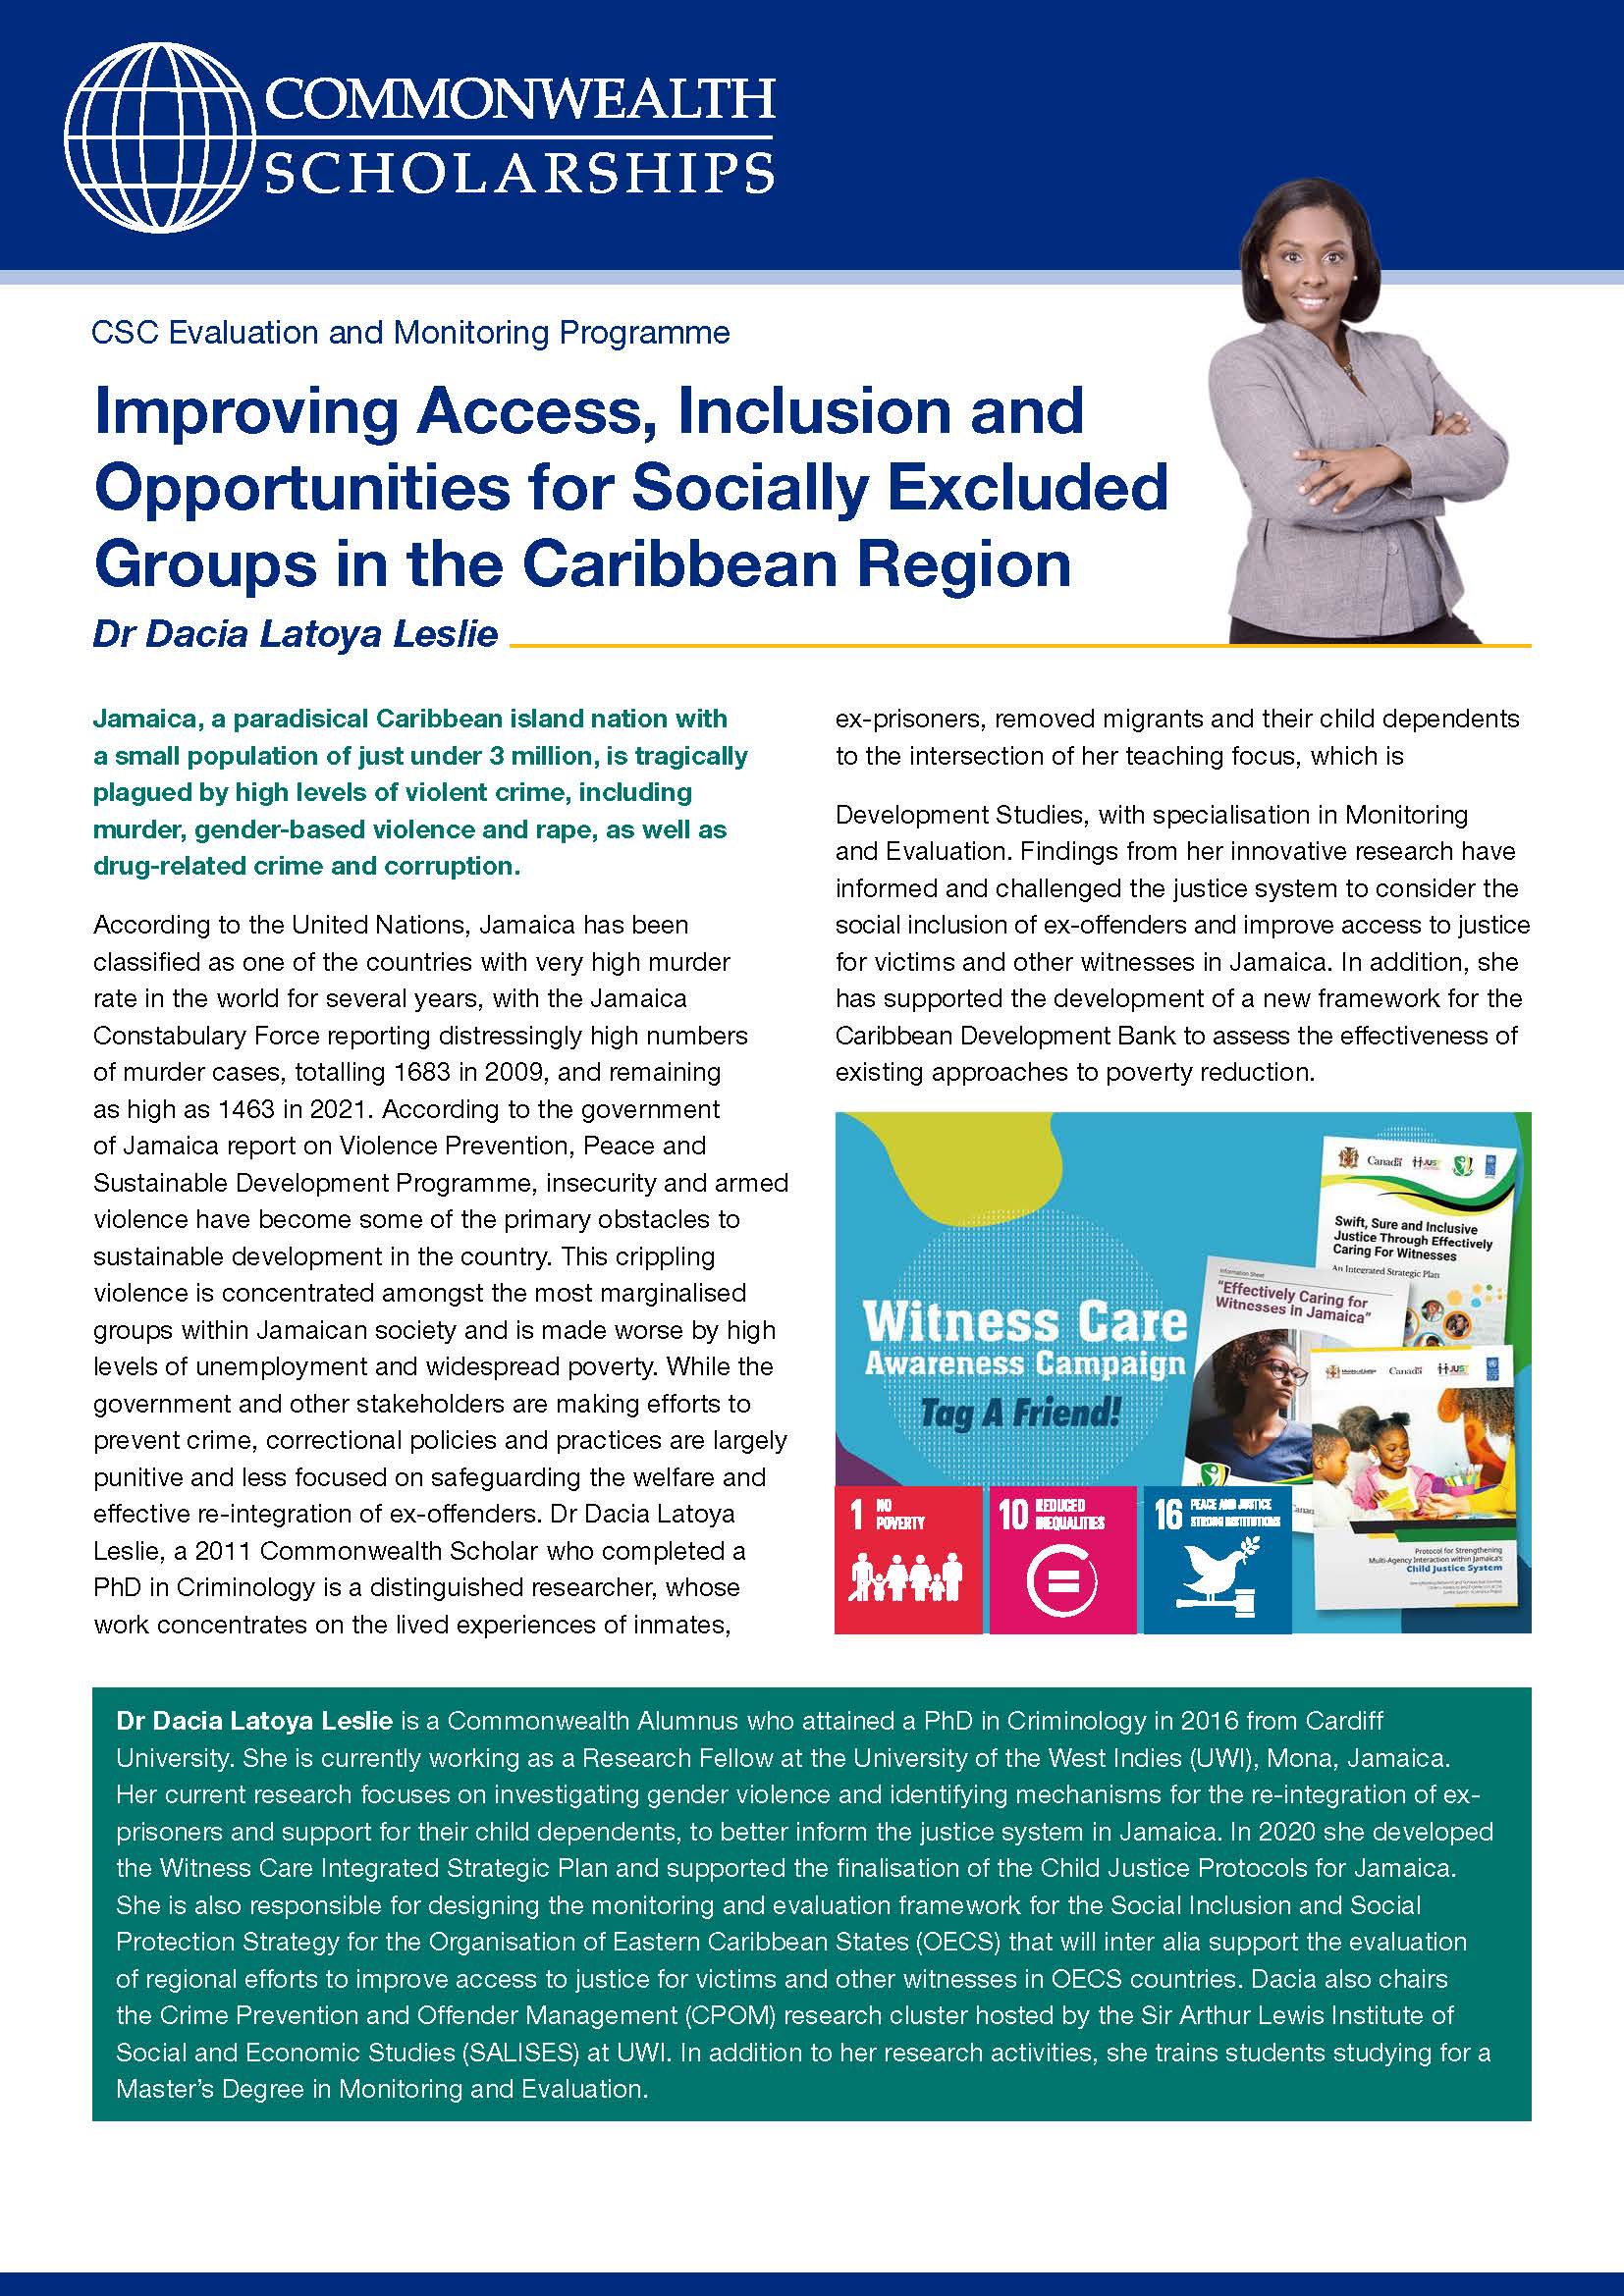 Improving Access, Inclusion and Opportunities for Socially Excluded Groups in the Caribbean Region Case Study Front Cover